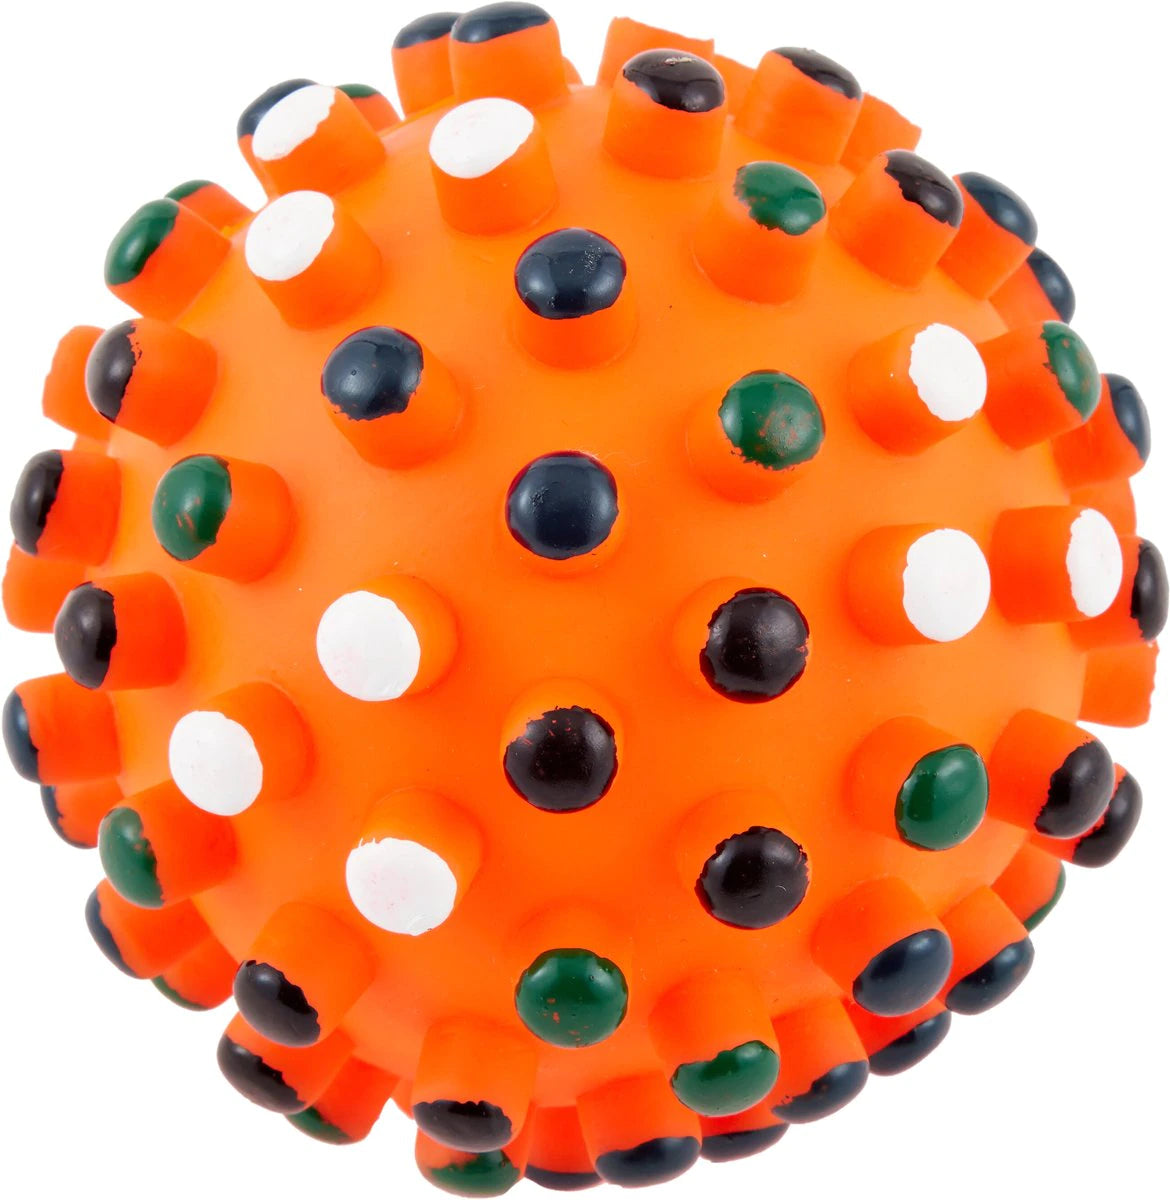 Spot Gumdrop Ball, Squeaky Toy For Dogs - Assorted Colors